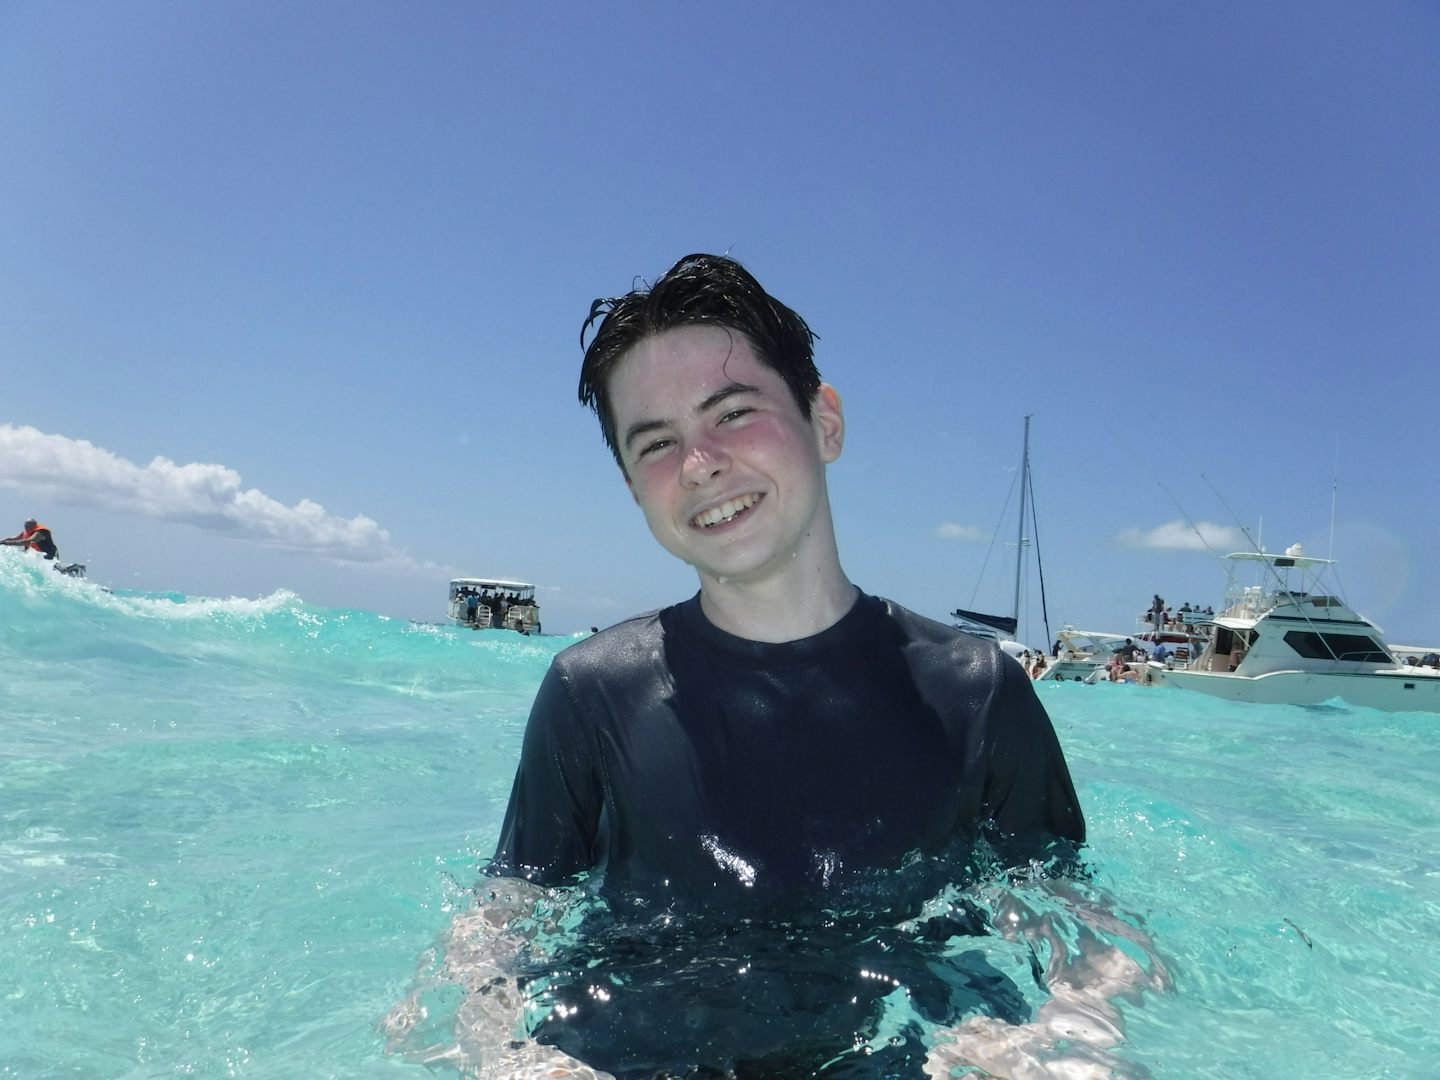 The beautiful water of Grand Cayman